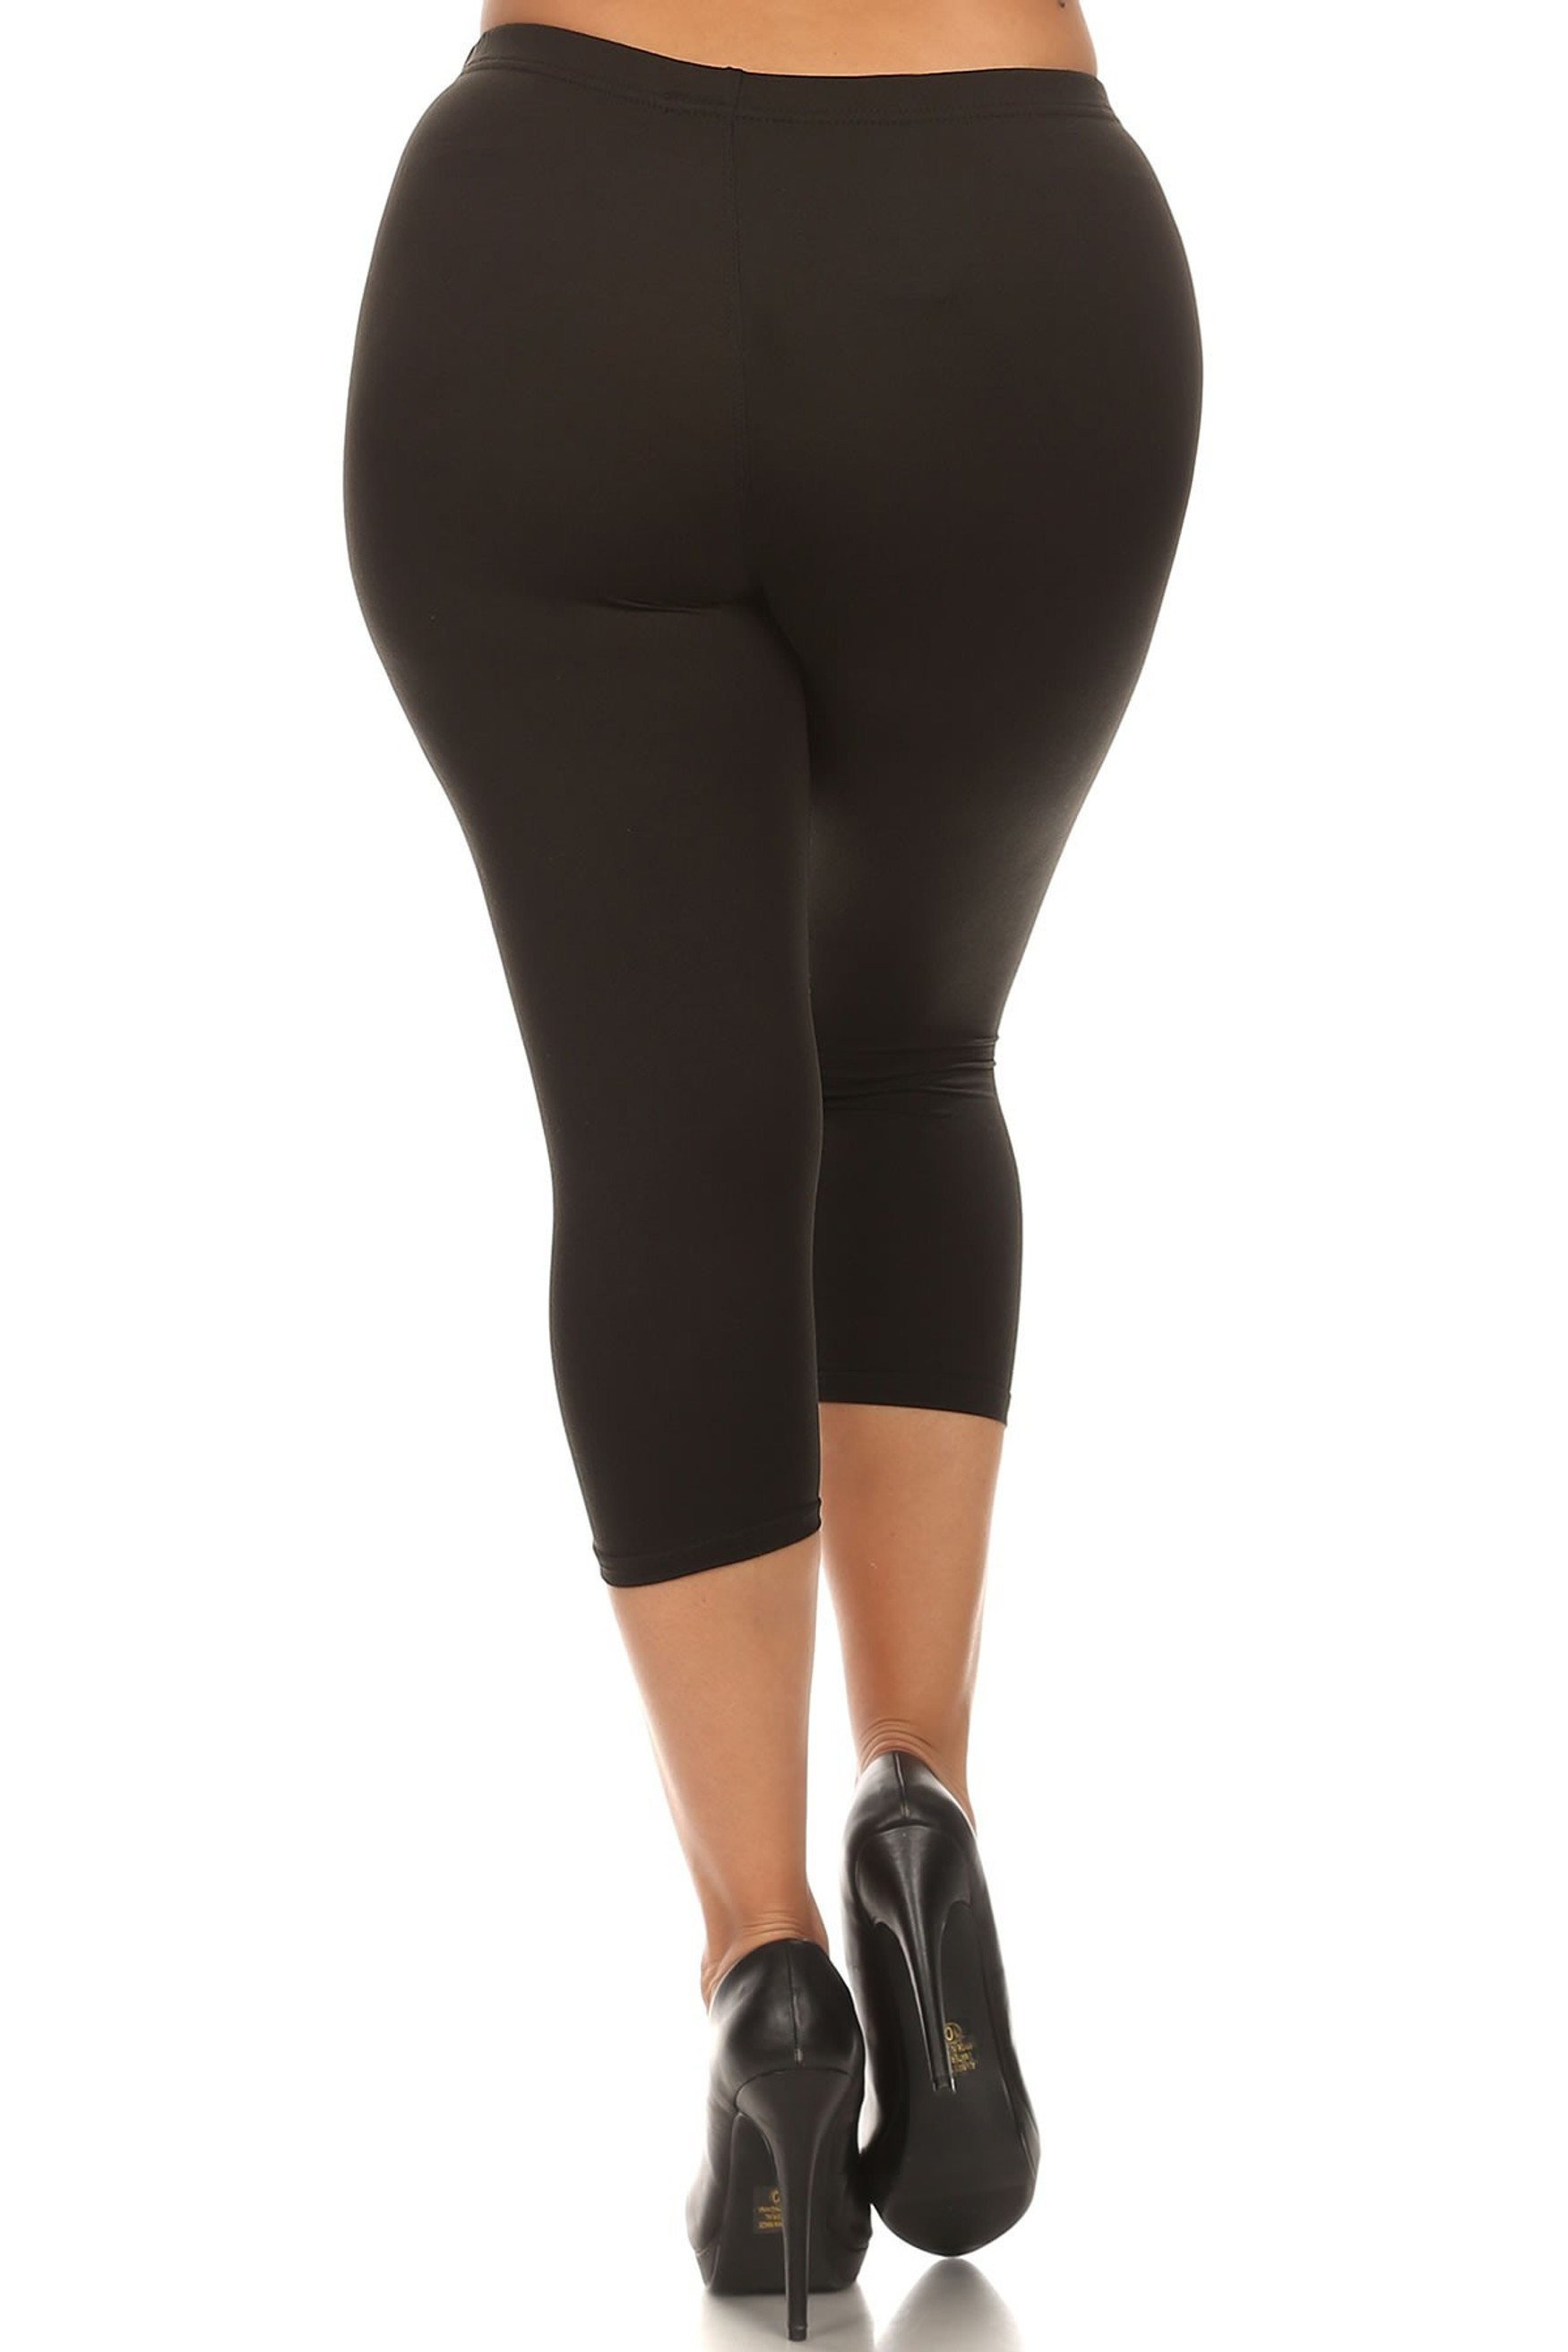 Back side image of Black Buttery Soft Basic Solid Extra Plus Size Capris - 3X-5X - New Mix